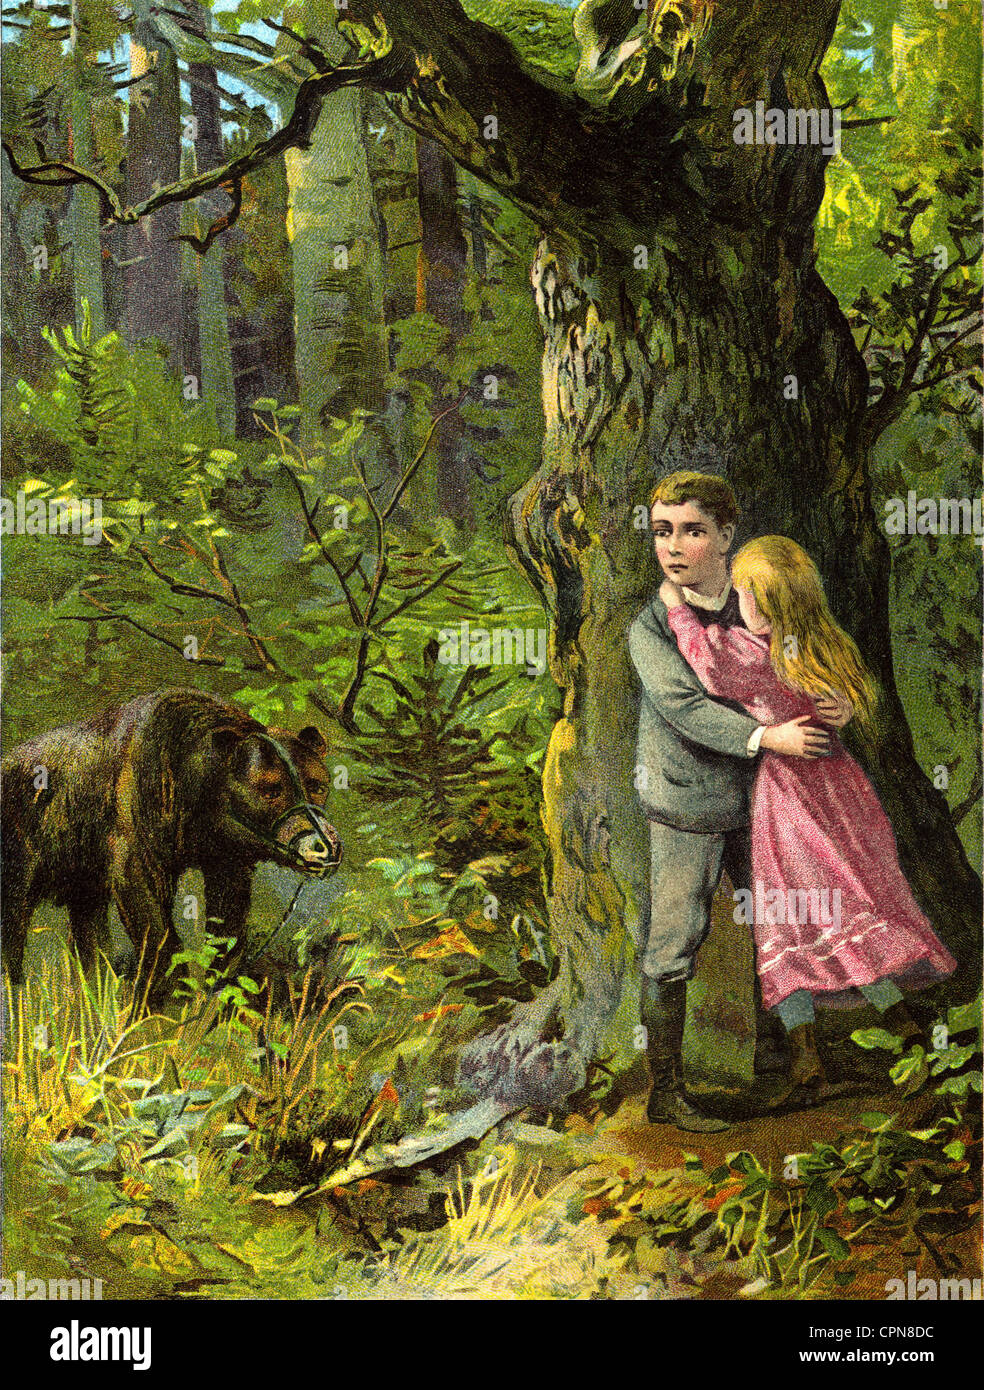 people, children, a boy and a girl attacked by a bear in the forest, Germany, 1887, Additional-Rights-Clearences-Not Available Stock Photo